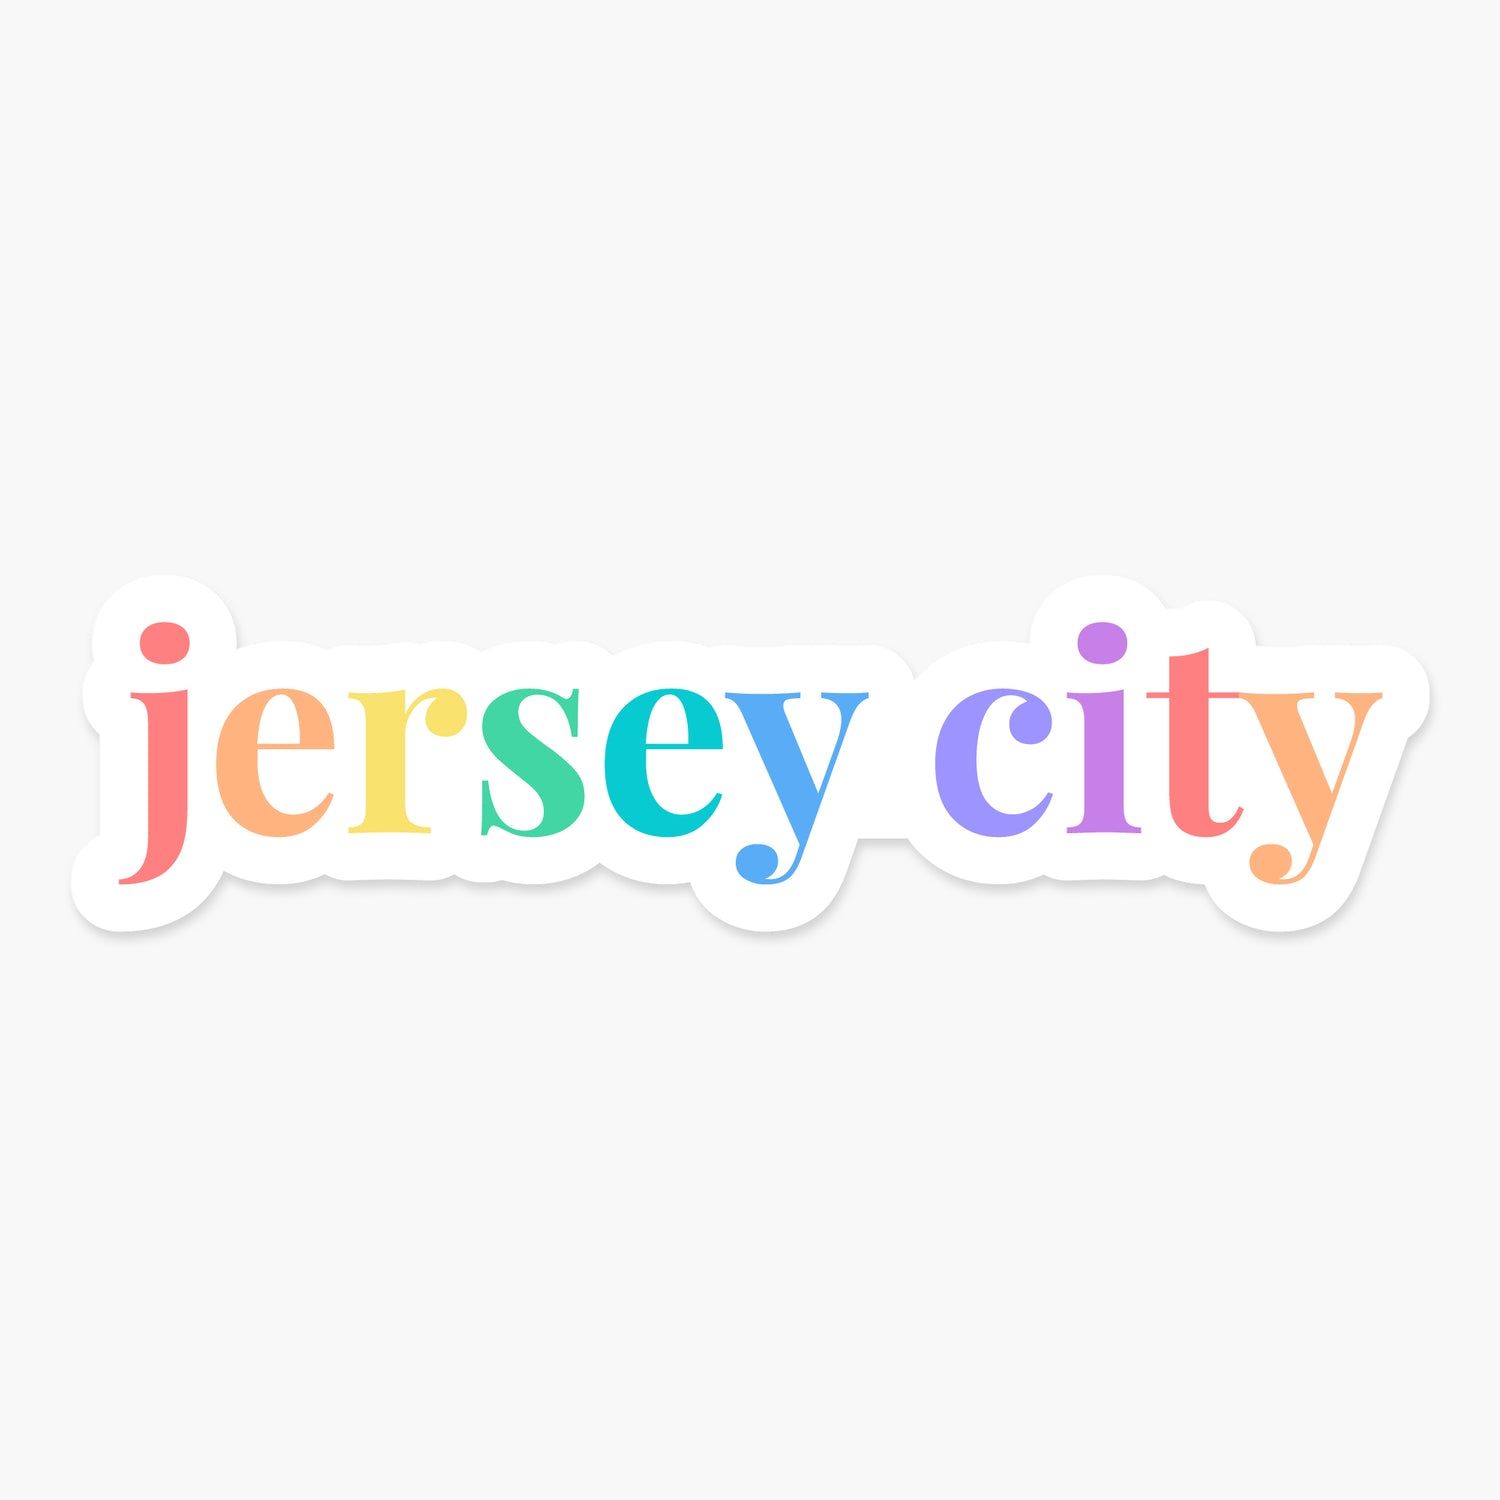 Jersey City, New Jersey - Everyday Sticker | Footnotes Paper